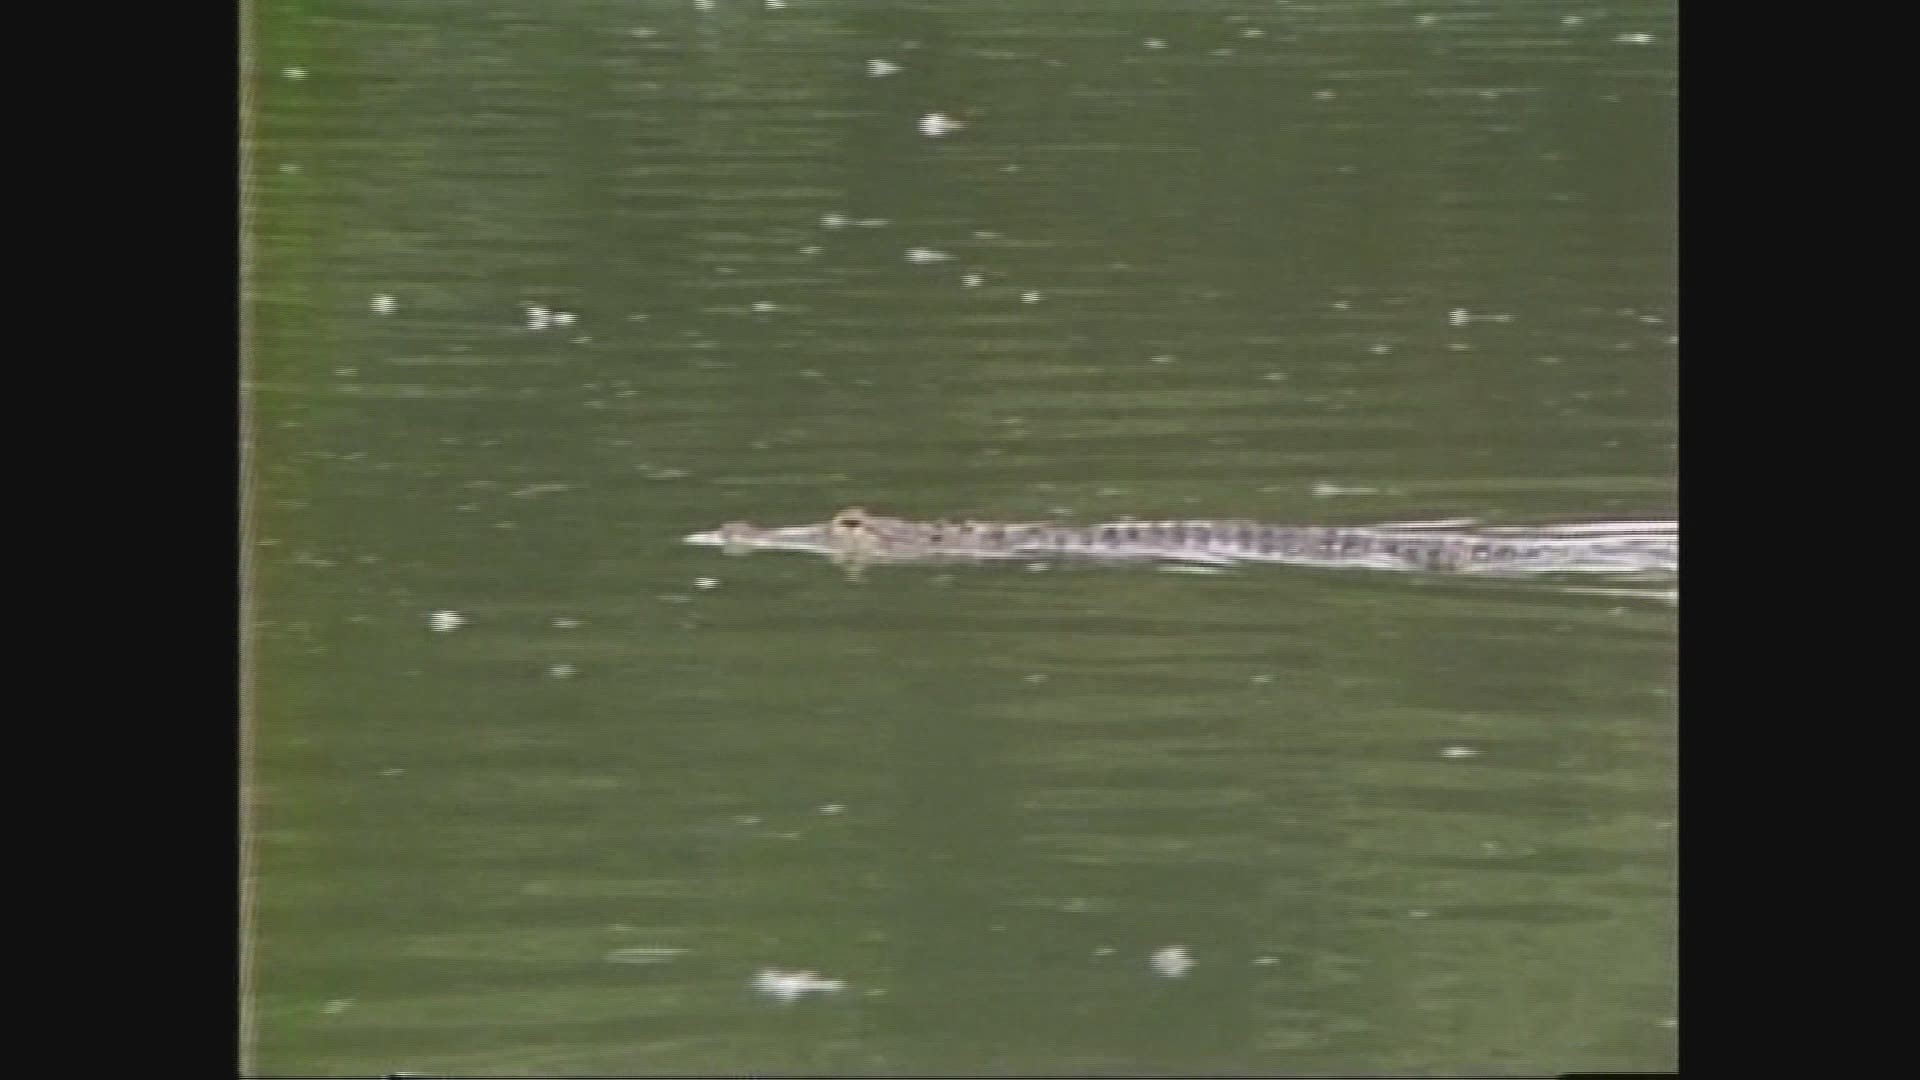 In 1981, Albert the Alligator escaped from the Denver Zoo and took up residence in the City Park duck pond nearby. He wasn't captured for 28 days.